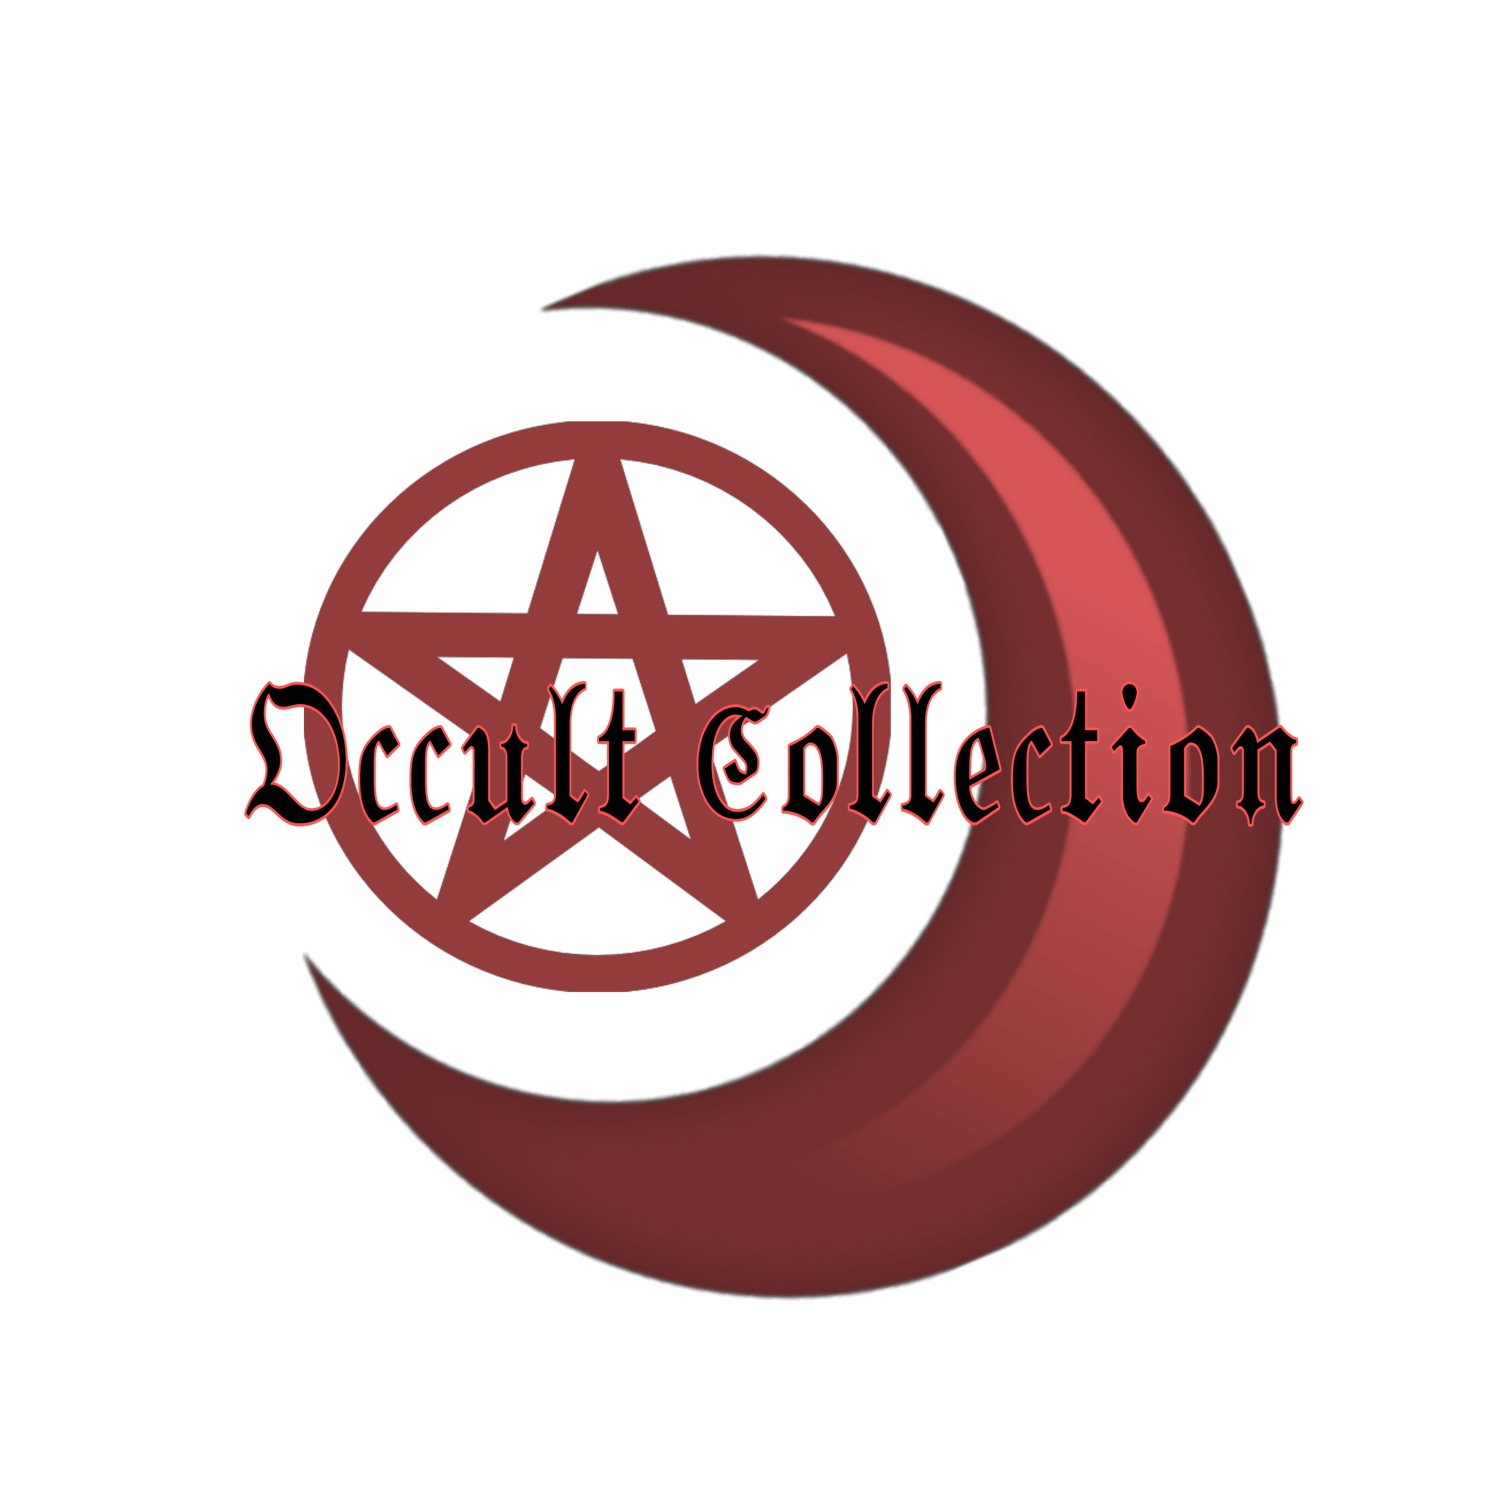 Occult Collection